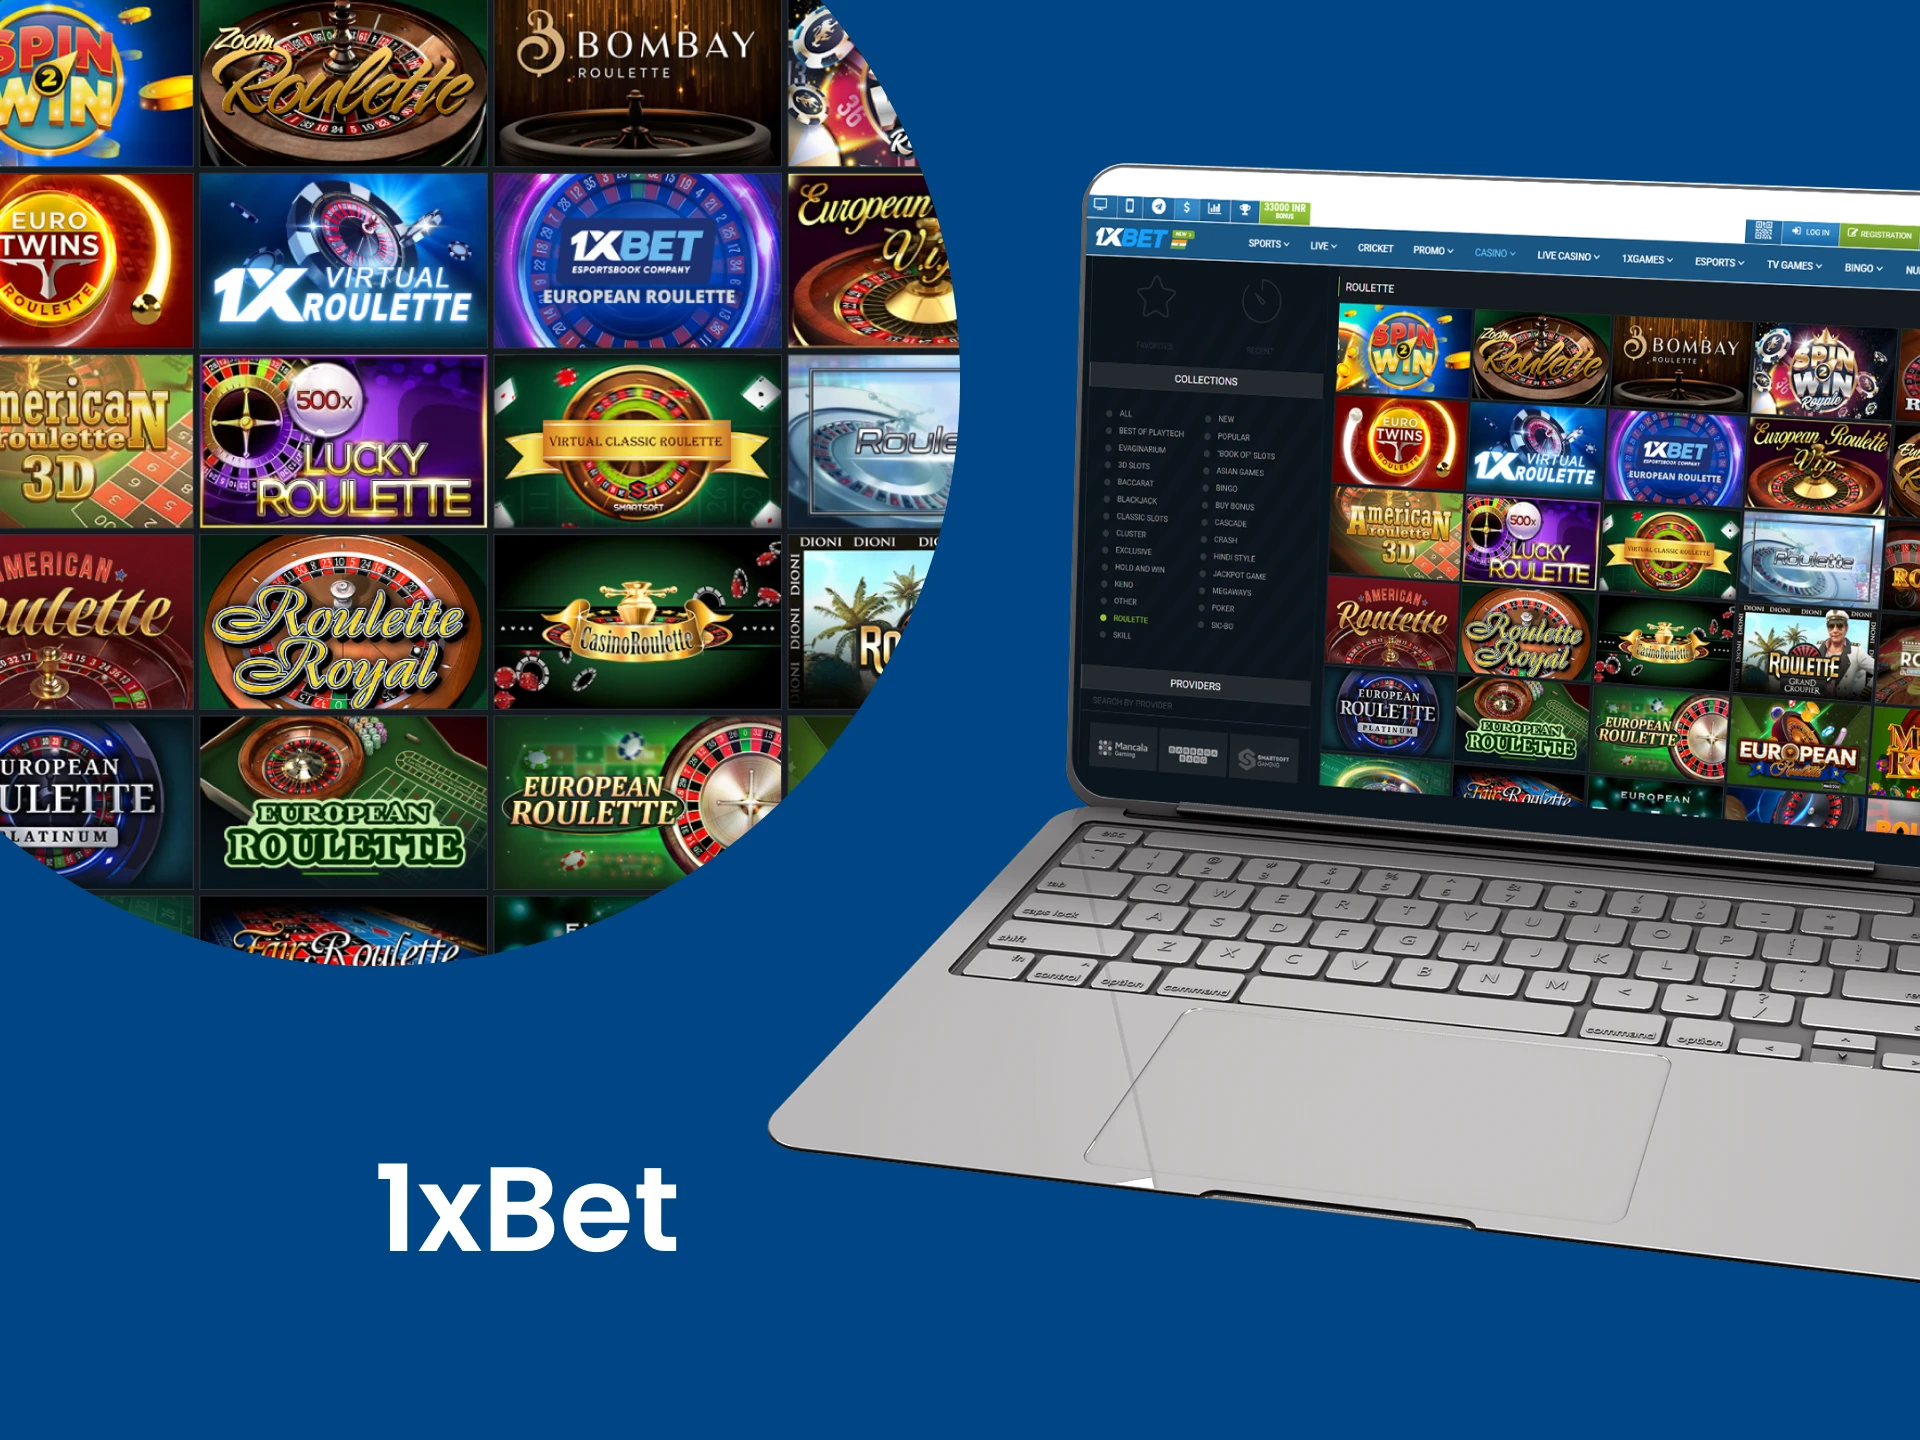 Choose a quality roulette service such as 1xbet.